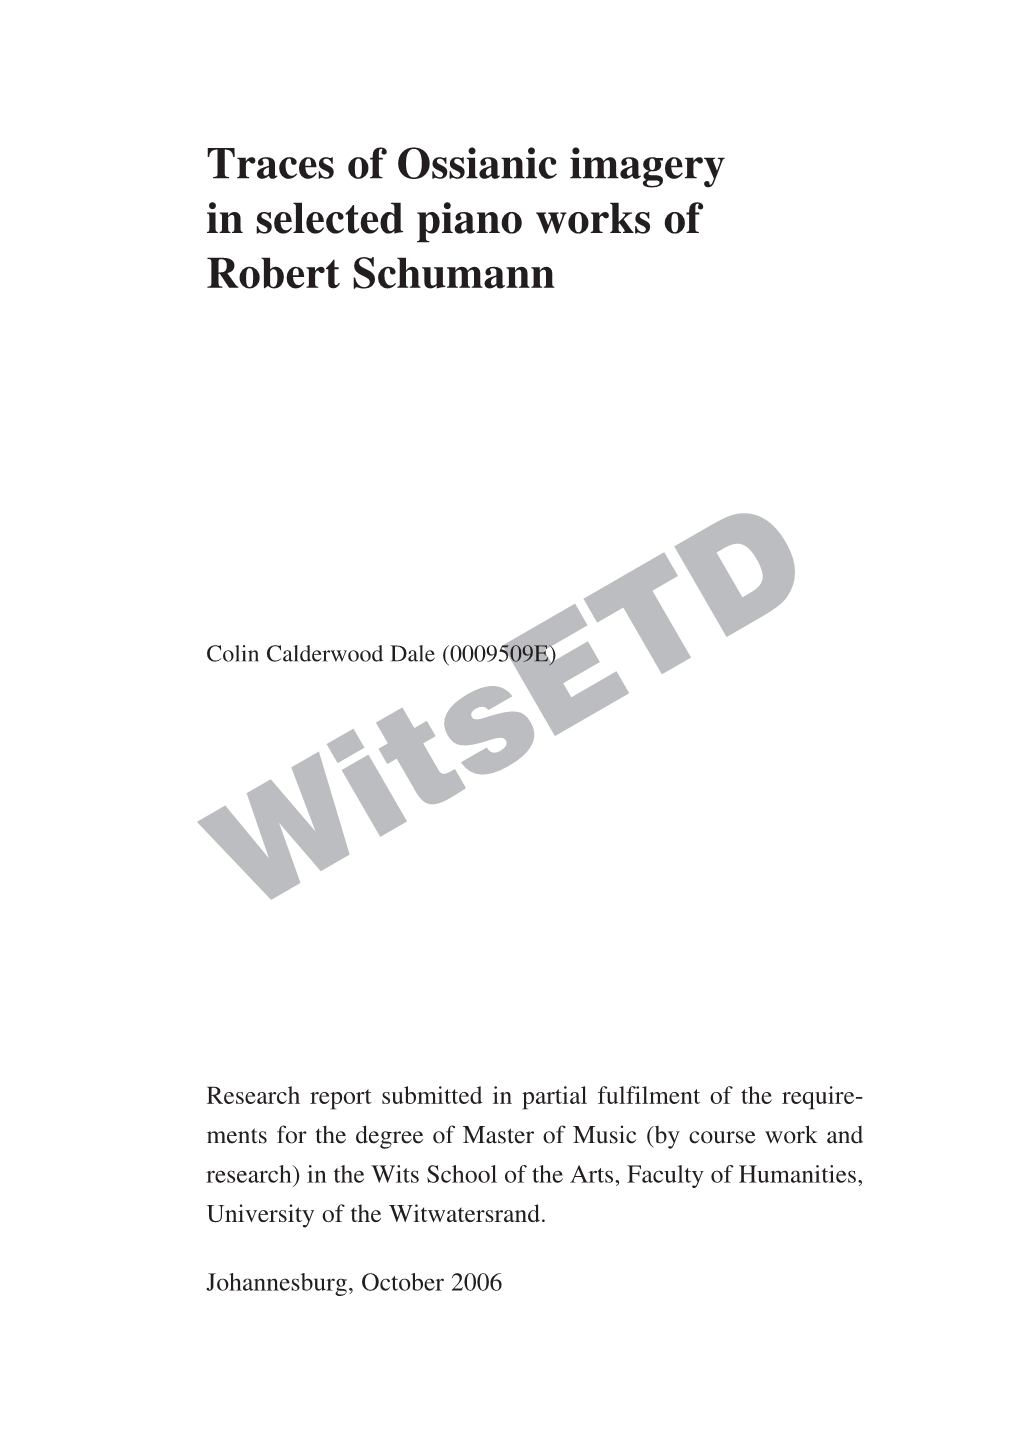 Traces of Ossianic Imagery in Selected Piano Works of Robert Schumann